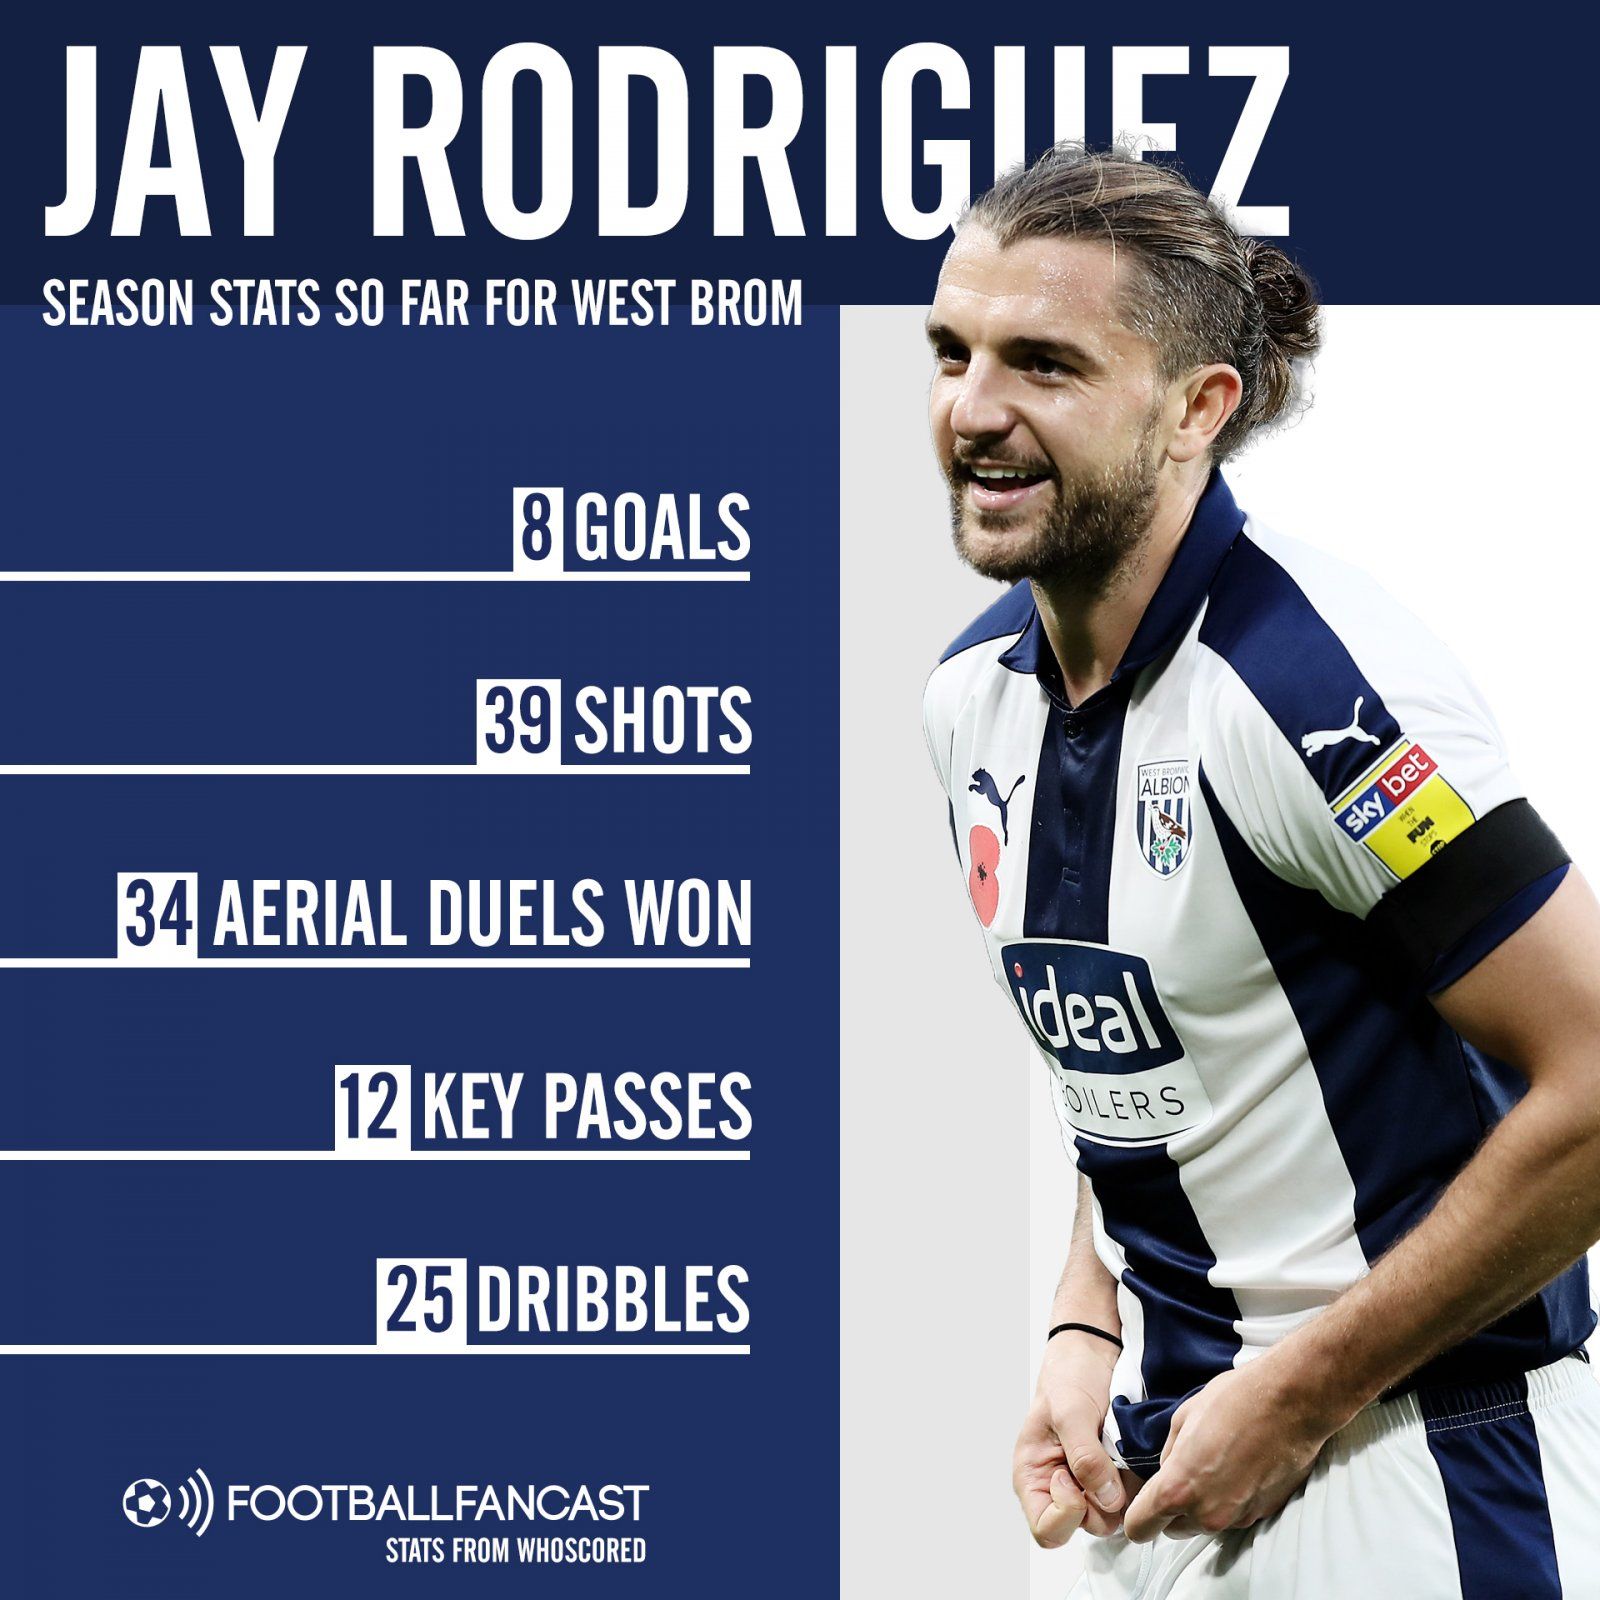 Jay Rodriguez season stats so far for West Brom